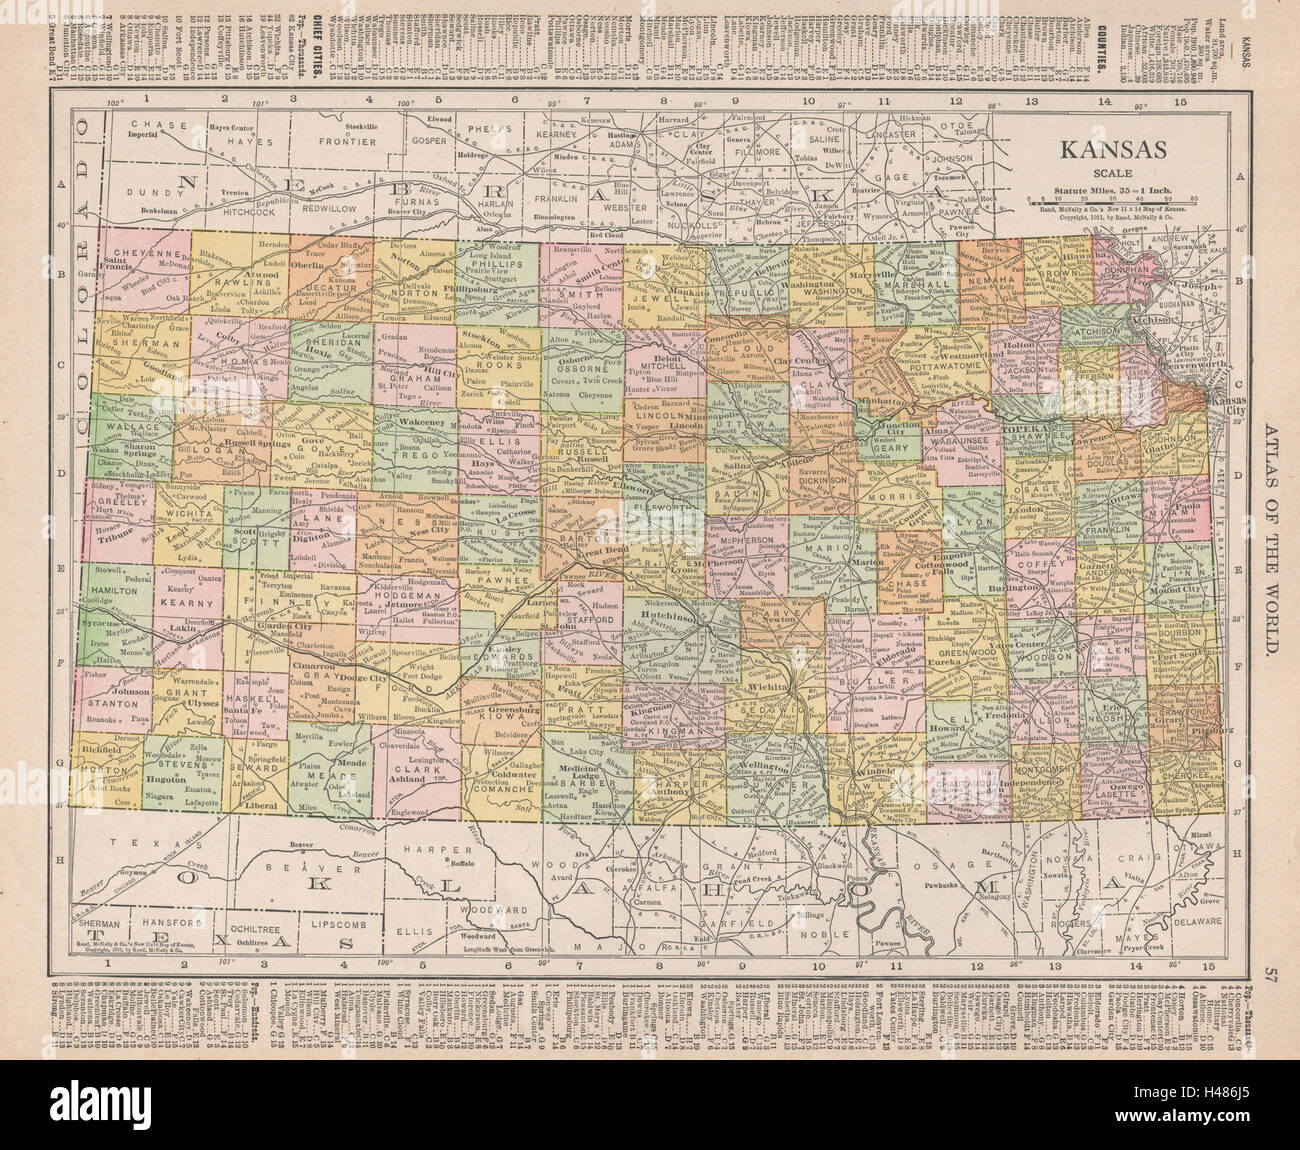 Kansas state map showing counties. RAND MCNALLY 1912 old antique chart Stock Photo